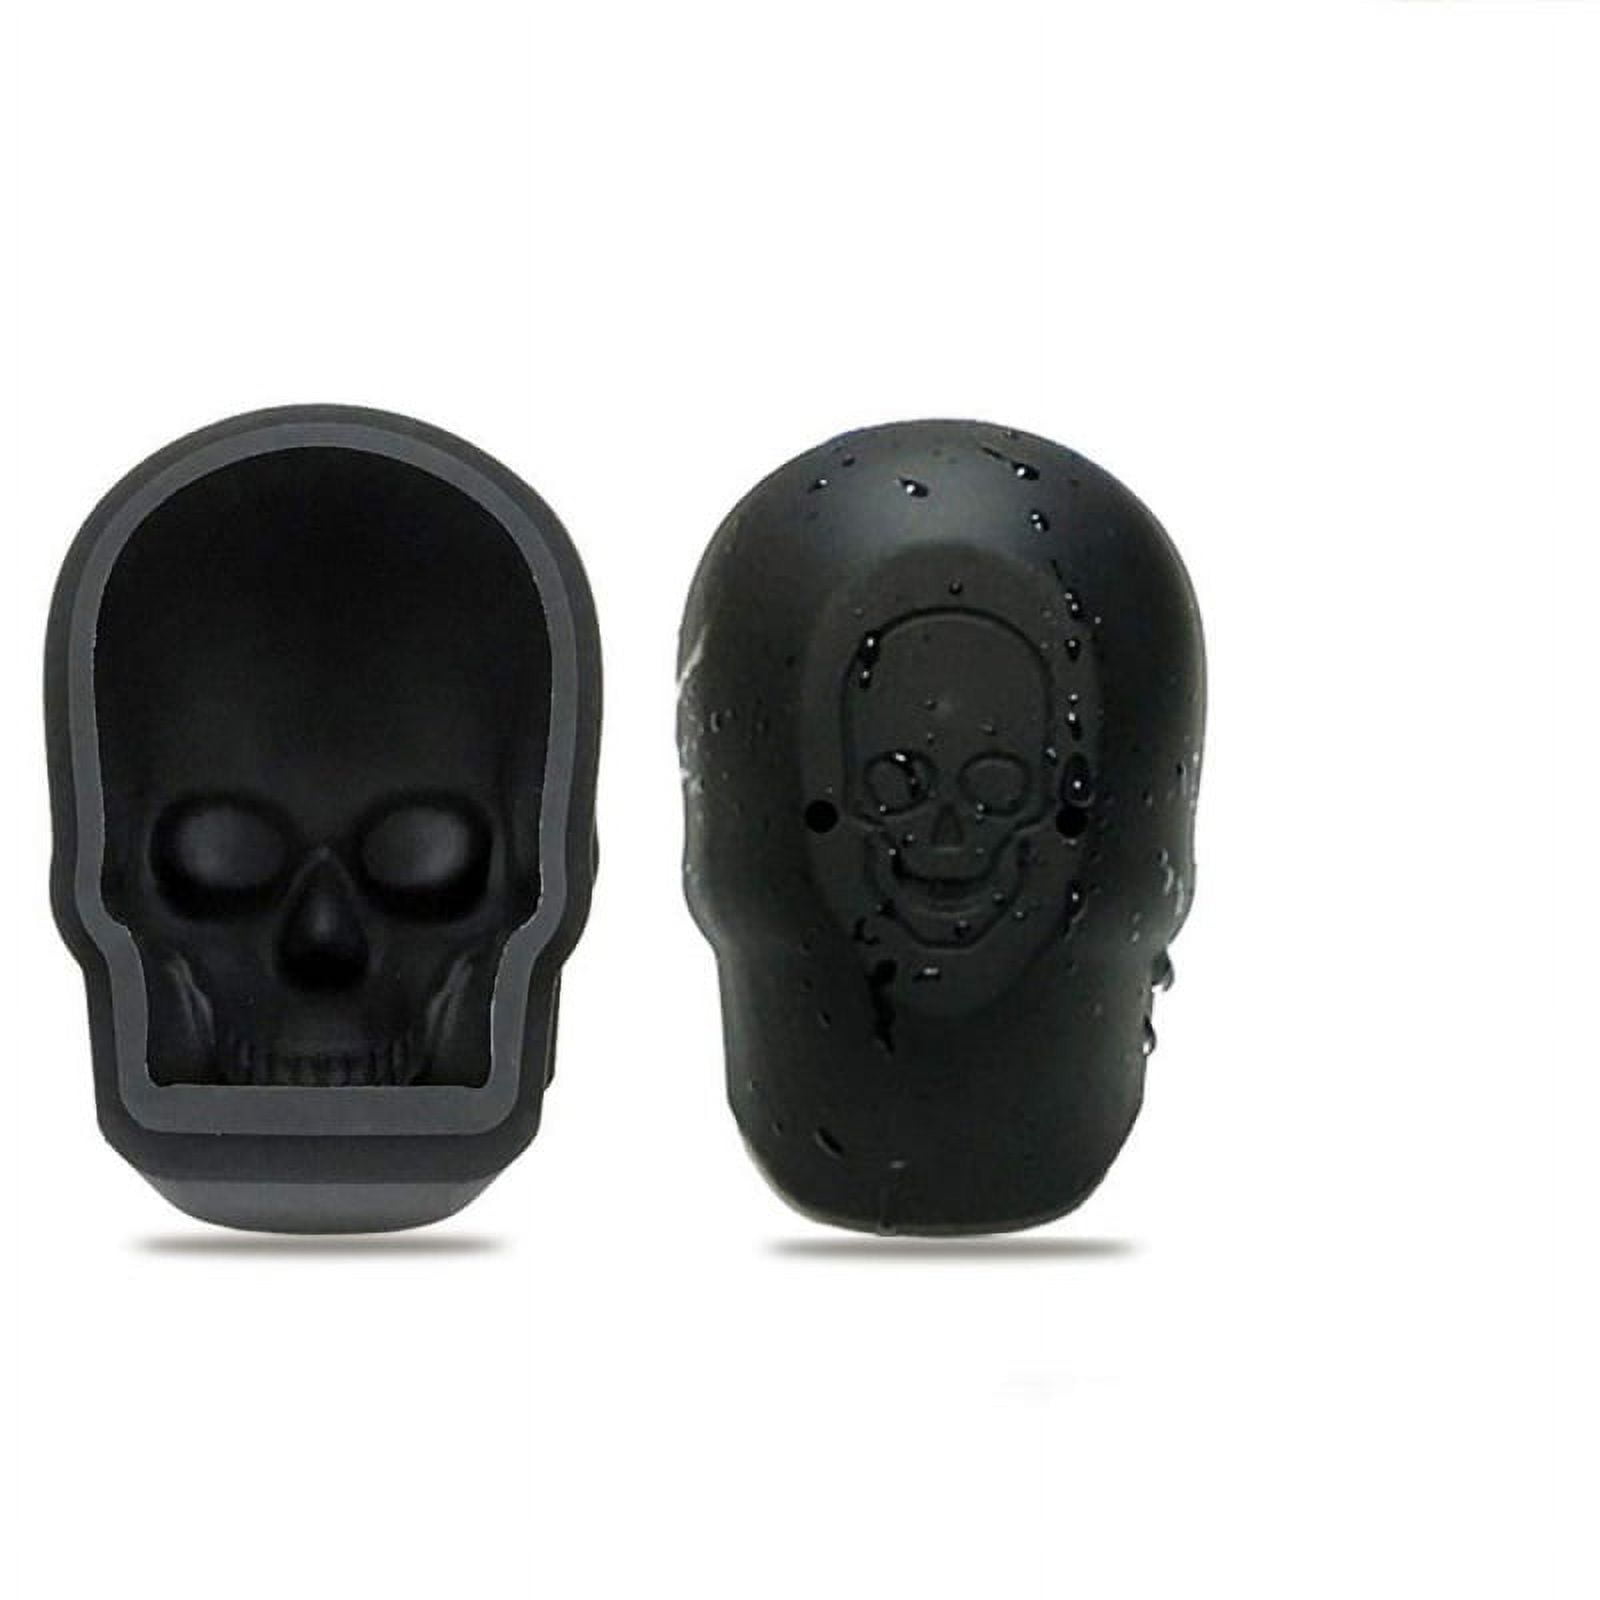  Injoehom Skull Shaped Ice Cube Molds Tray With Lid For